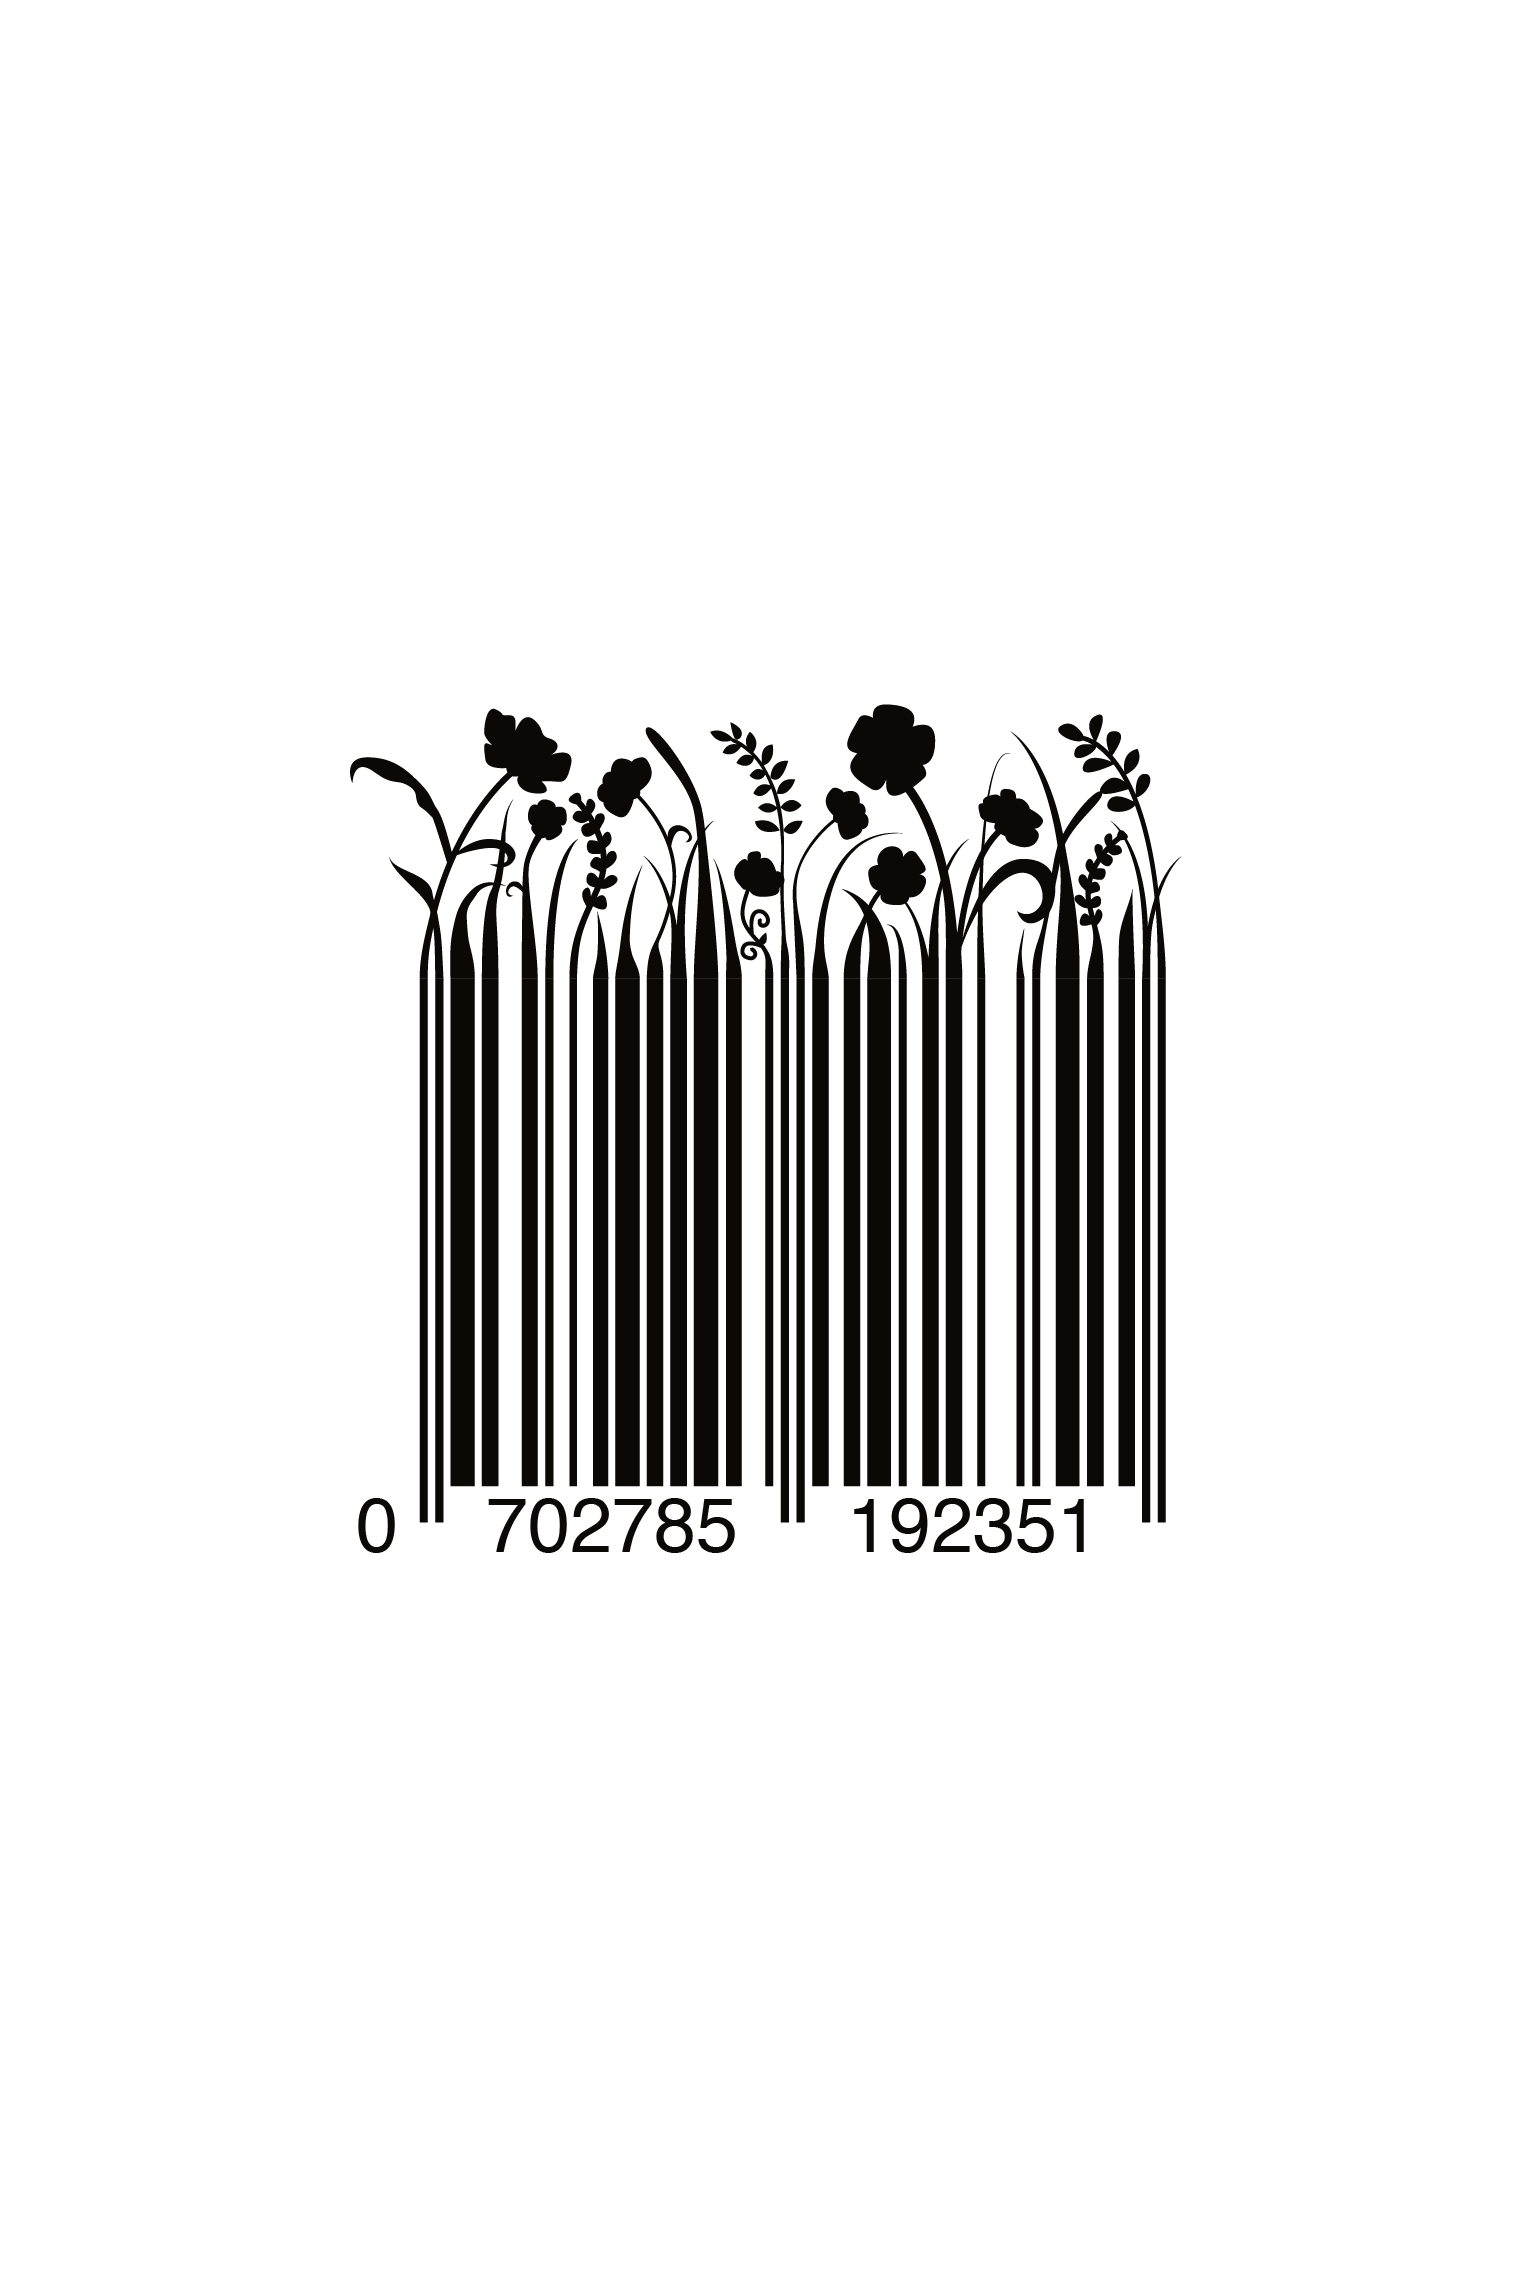 Camille Co. Floral Barcode Design Co. is a luxury soap